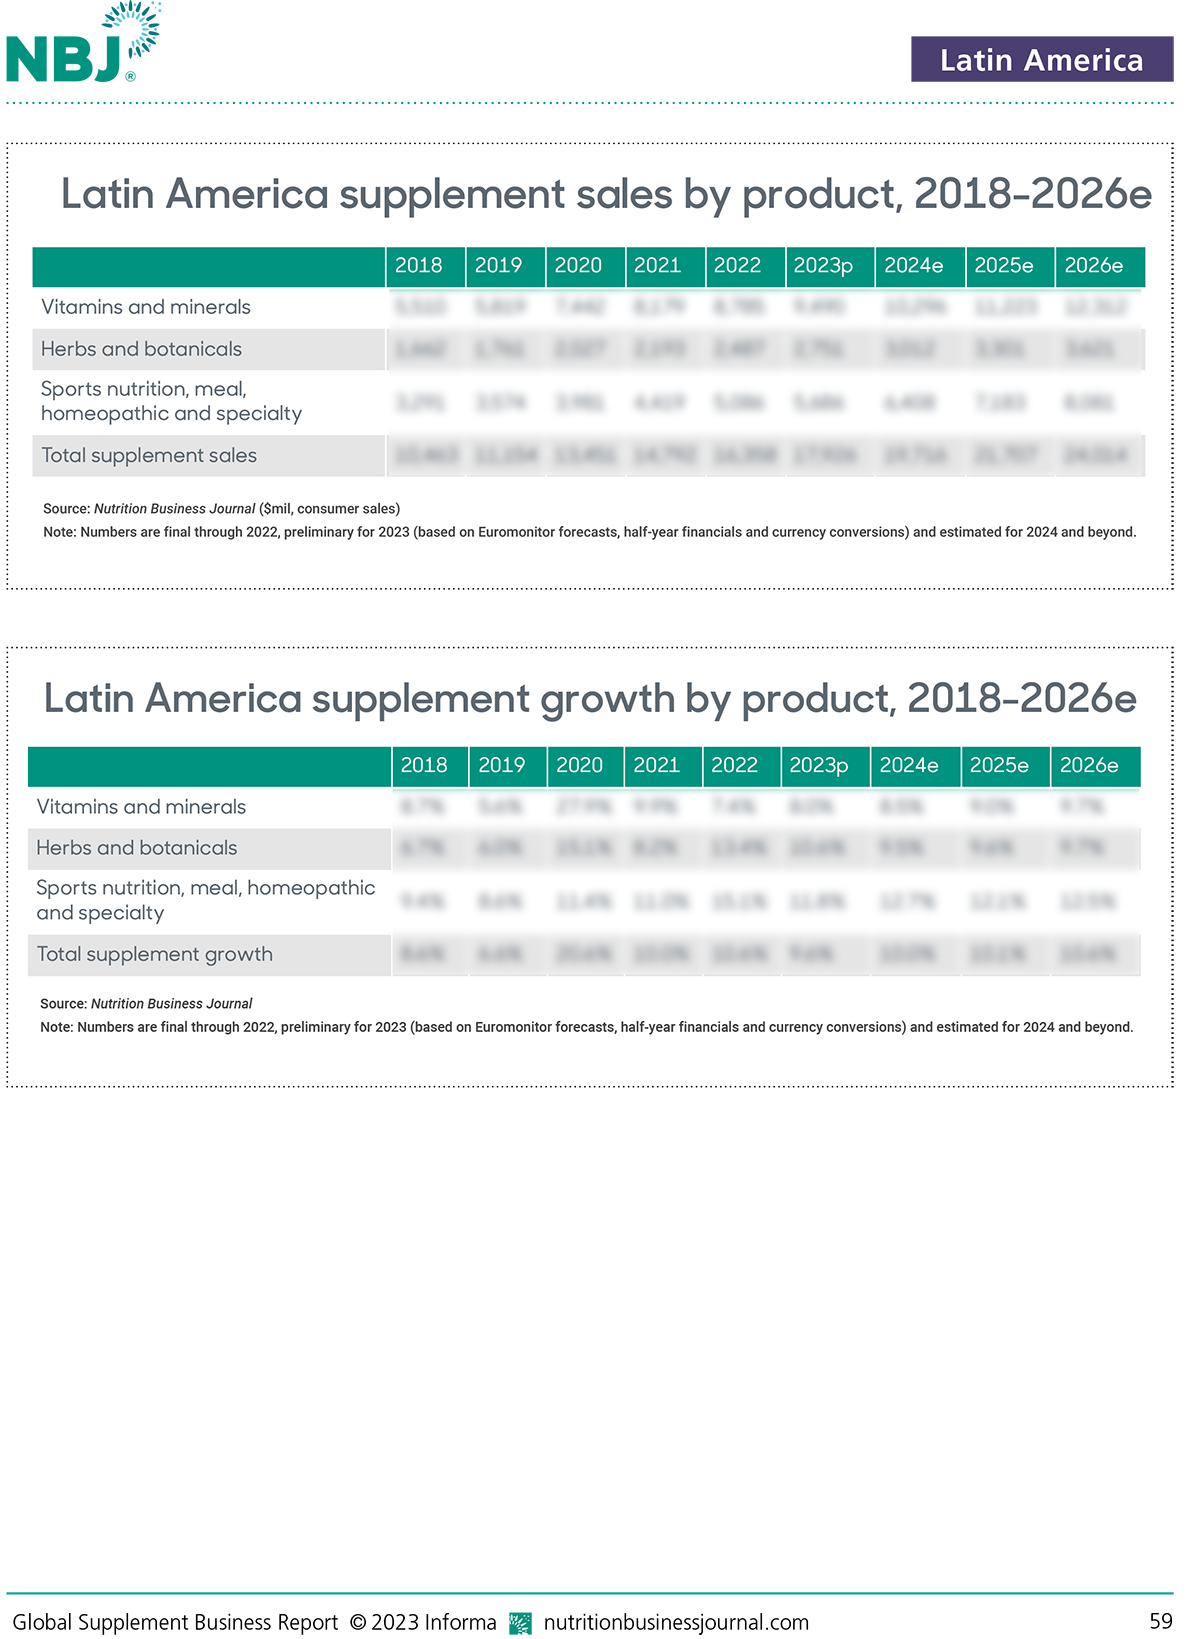 Latin America Supplement Sales and Growth